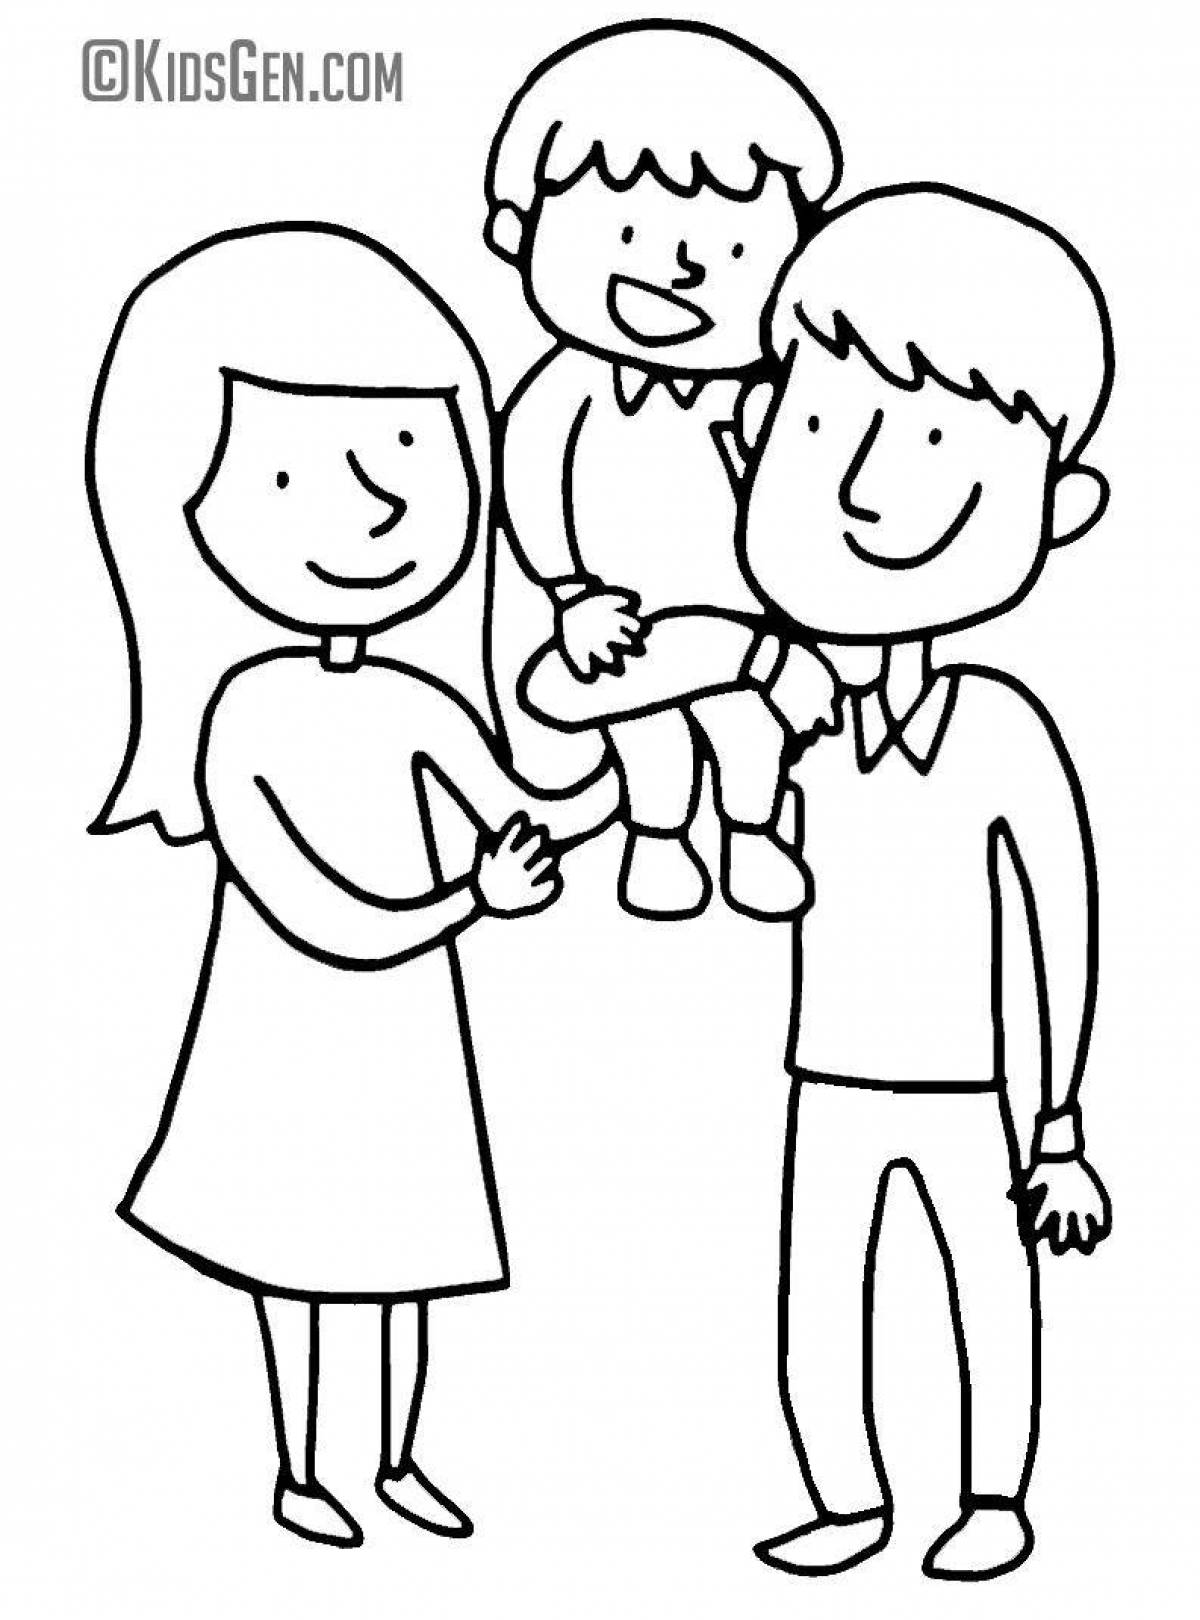 Coloring page loving mom and dad